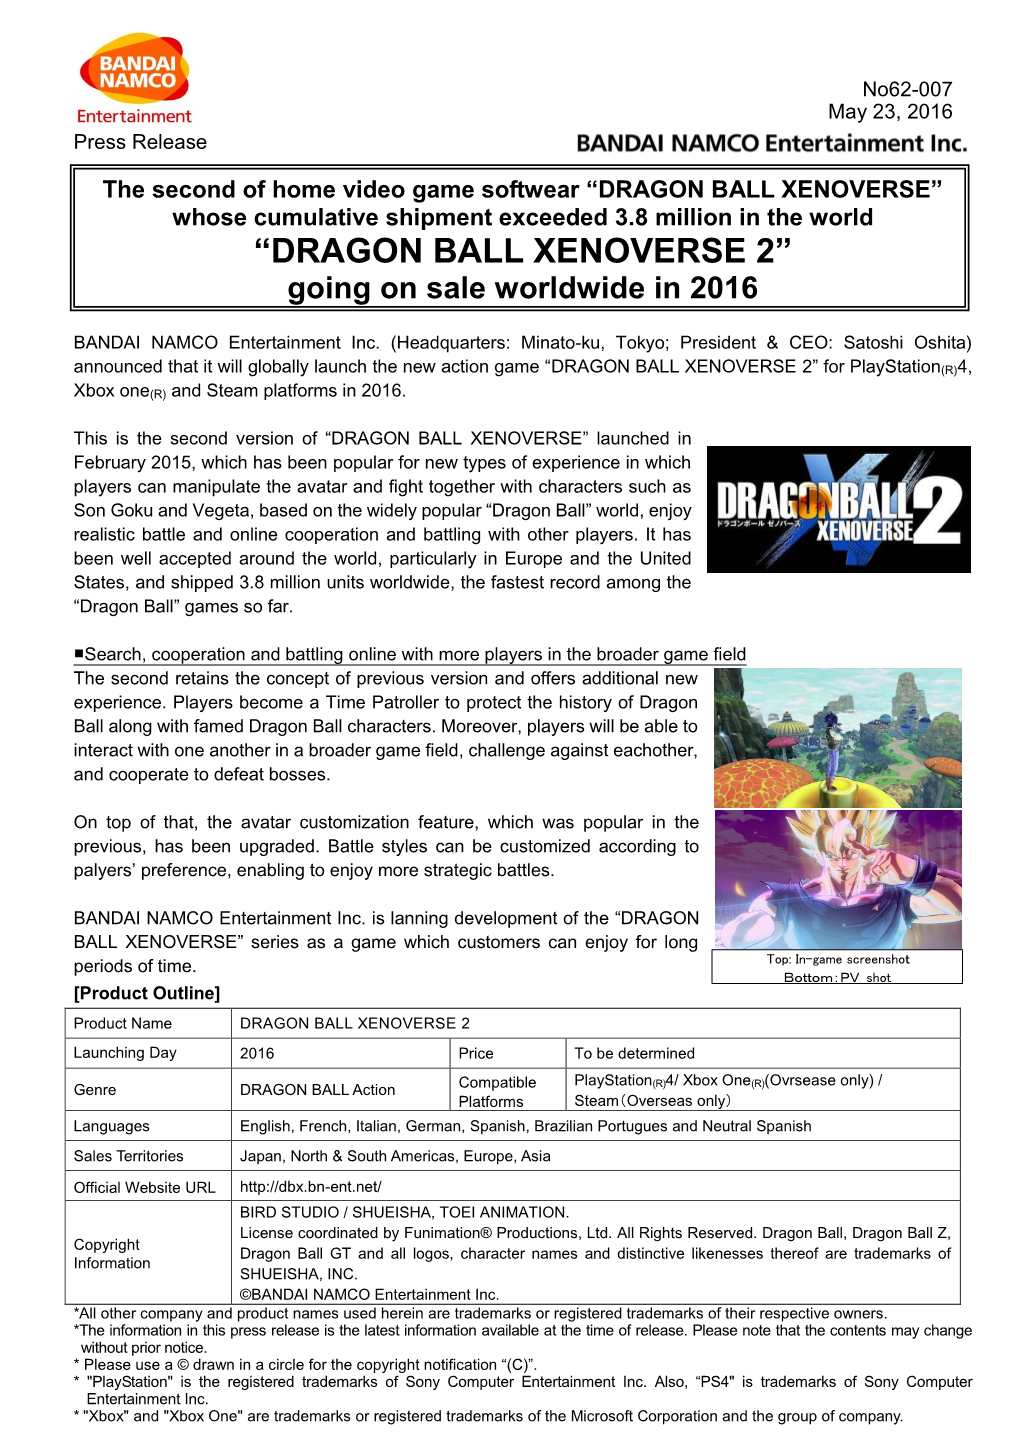 “DRAGON BALL XENOVERSE 2” Going on Sale Worldwide in 2016